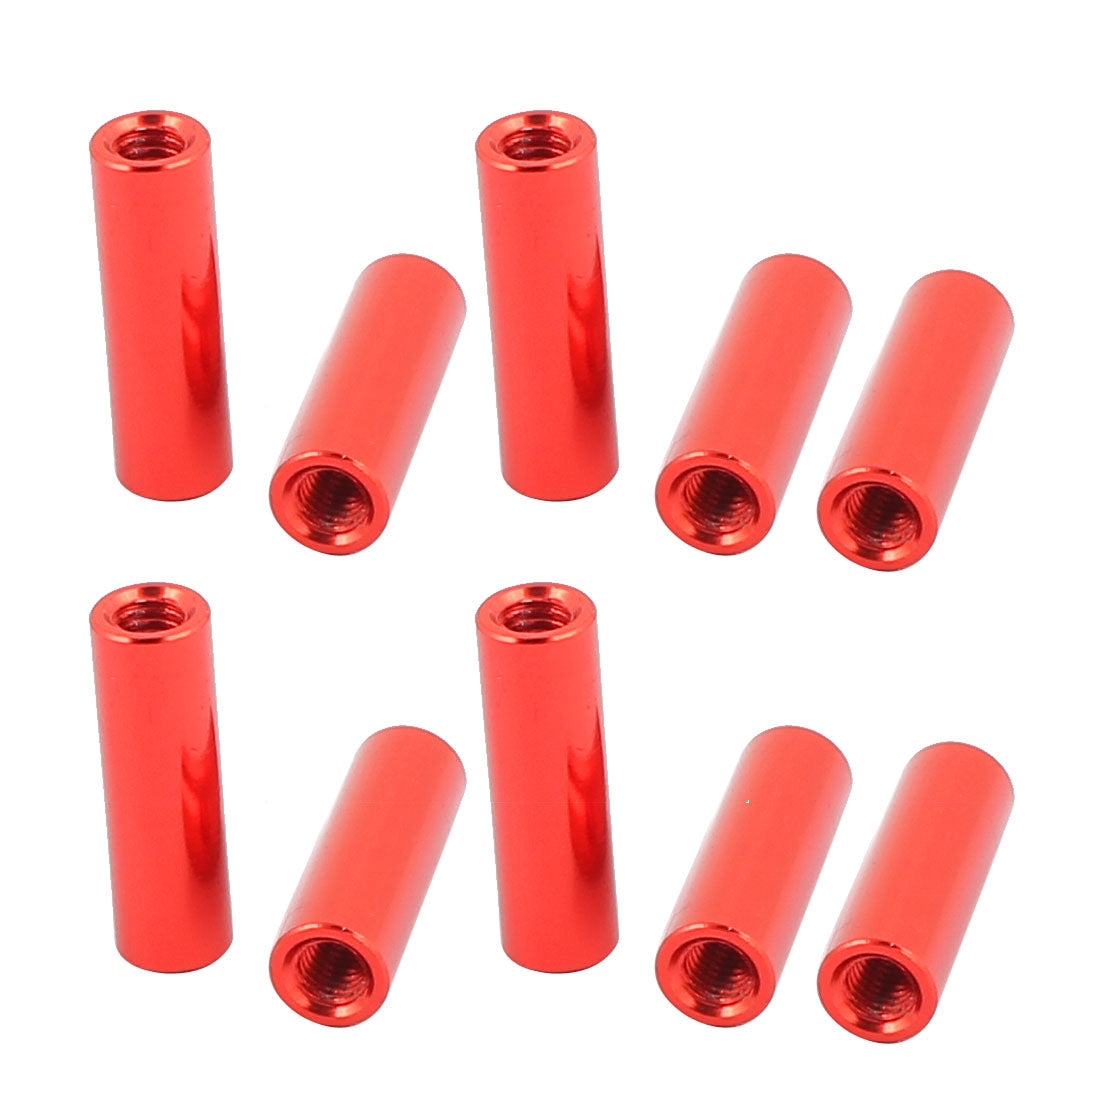 uxcell Uxcell 10 Pcs M3 x 16mm Round Aluminum Column Alloy Standoff Spacer Stud Fastener for Quadcopter Red